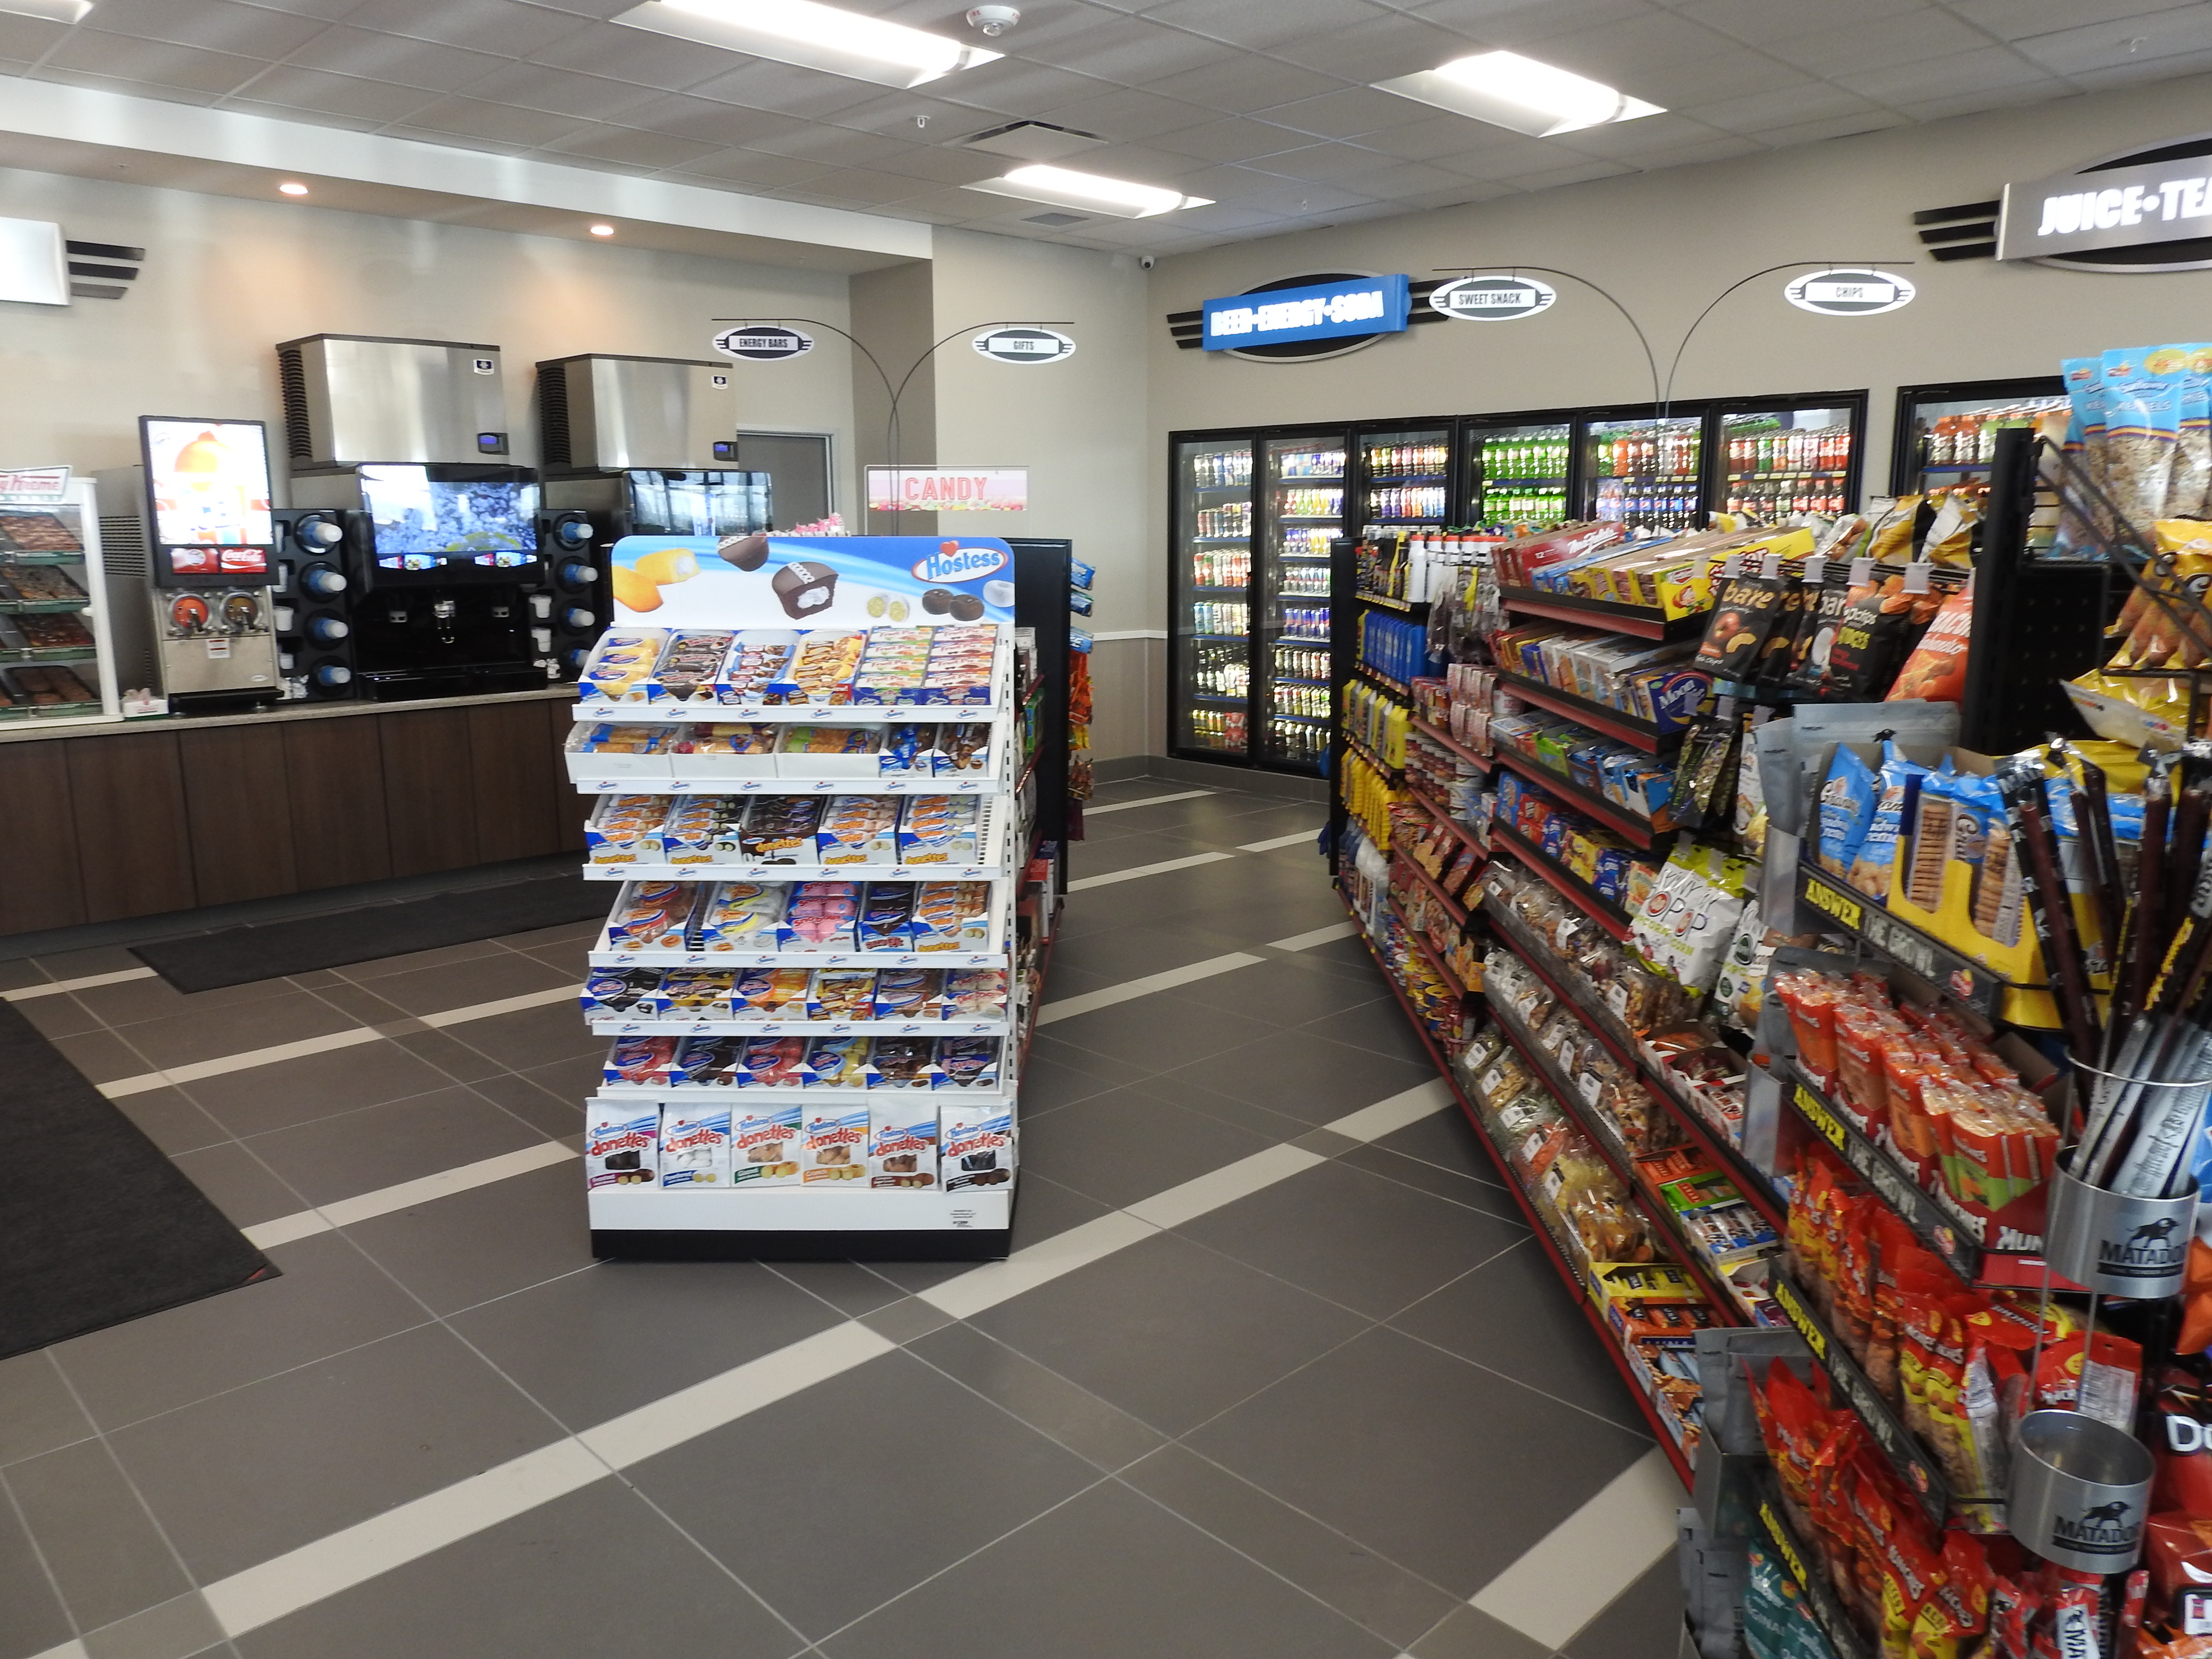 Slc Adds New Convenience Store And Gas Station To Park And Wait Lot Wheels Up